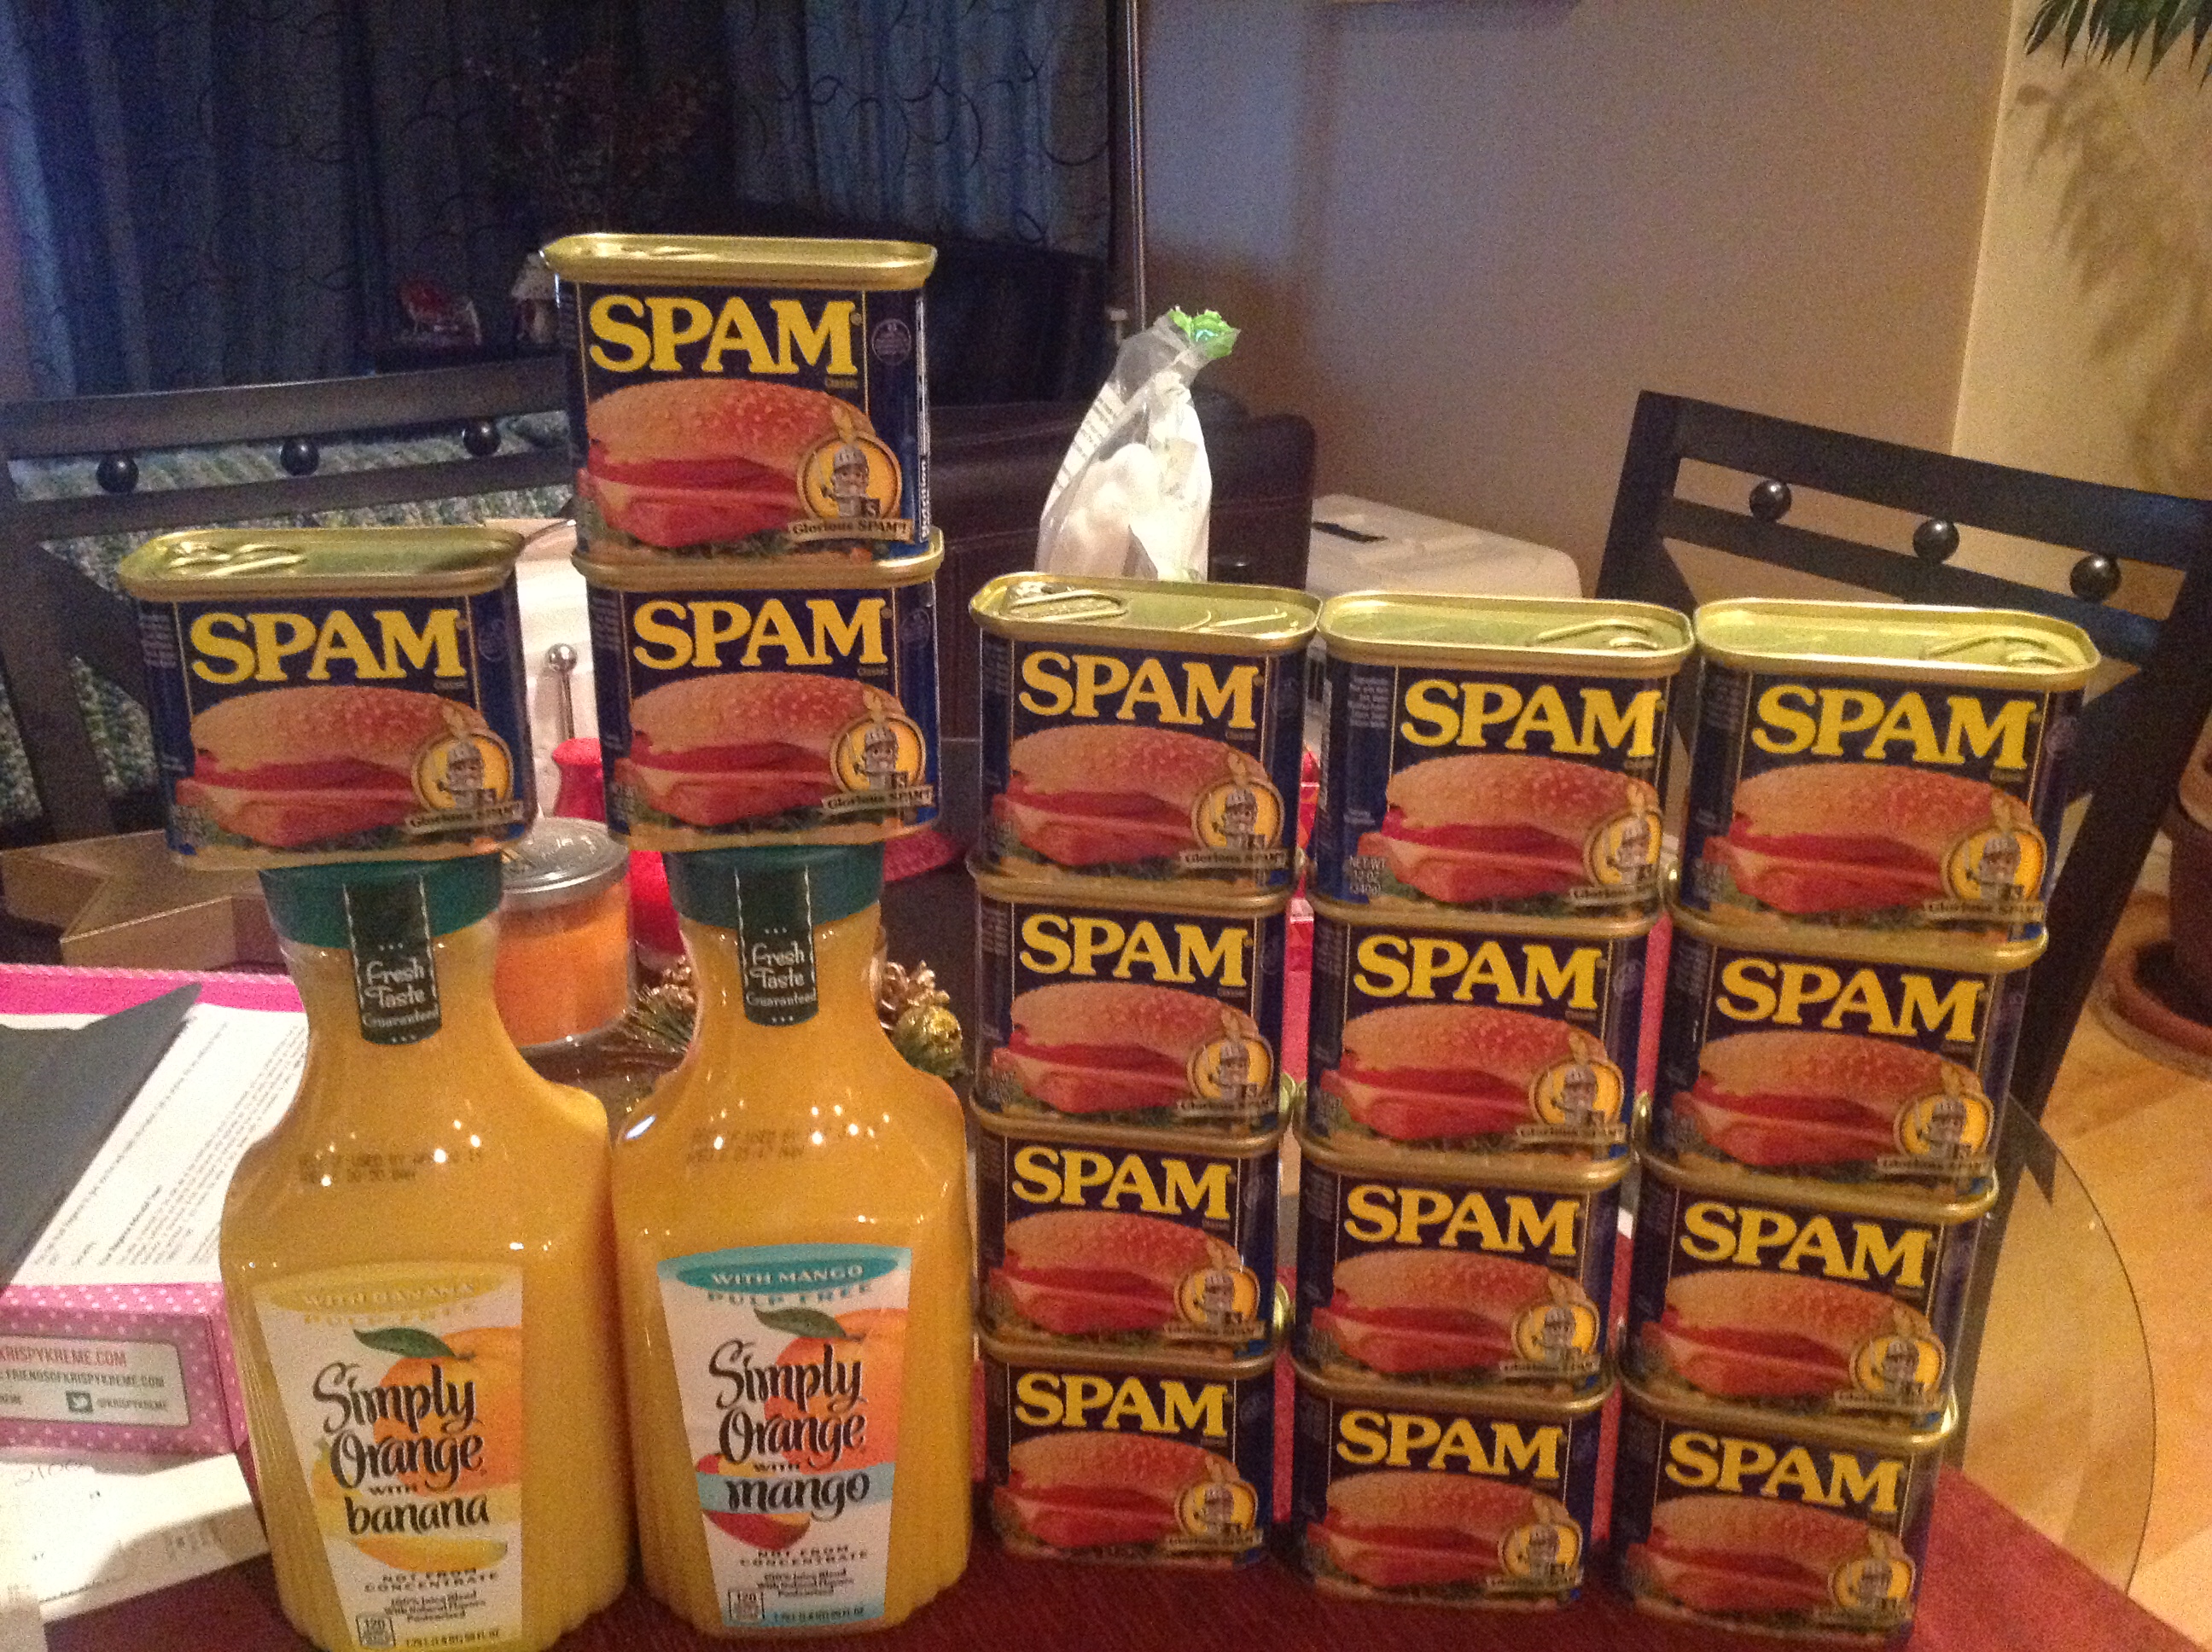 safeway:I paid $21,saved$65! all the spam will be ship to my family back in the Philippines! Spam is not healthy but every once in a while is fine(in my opinion!) this will last them for a year or two!